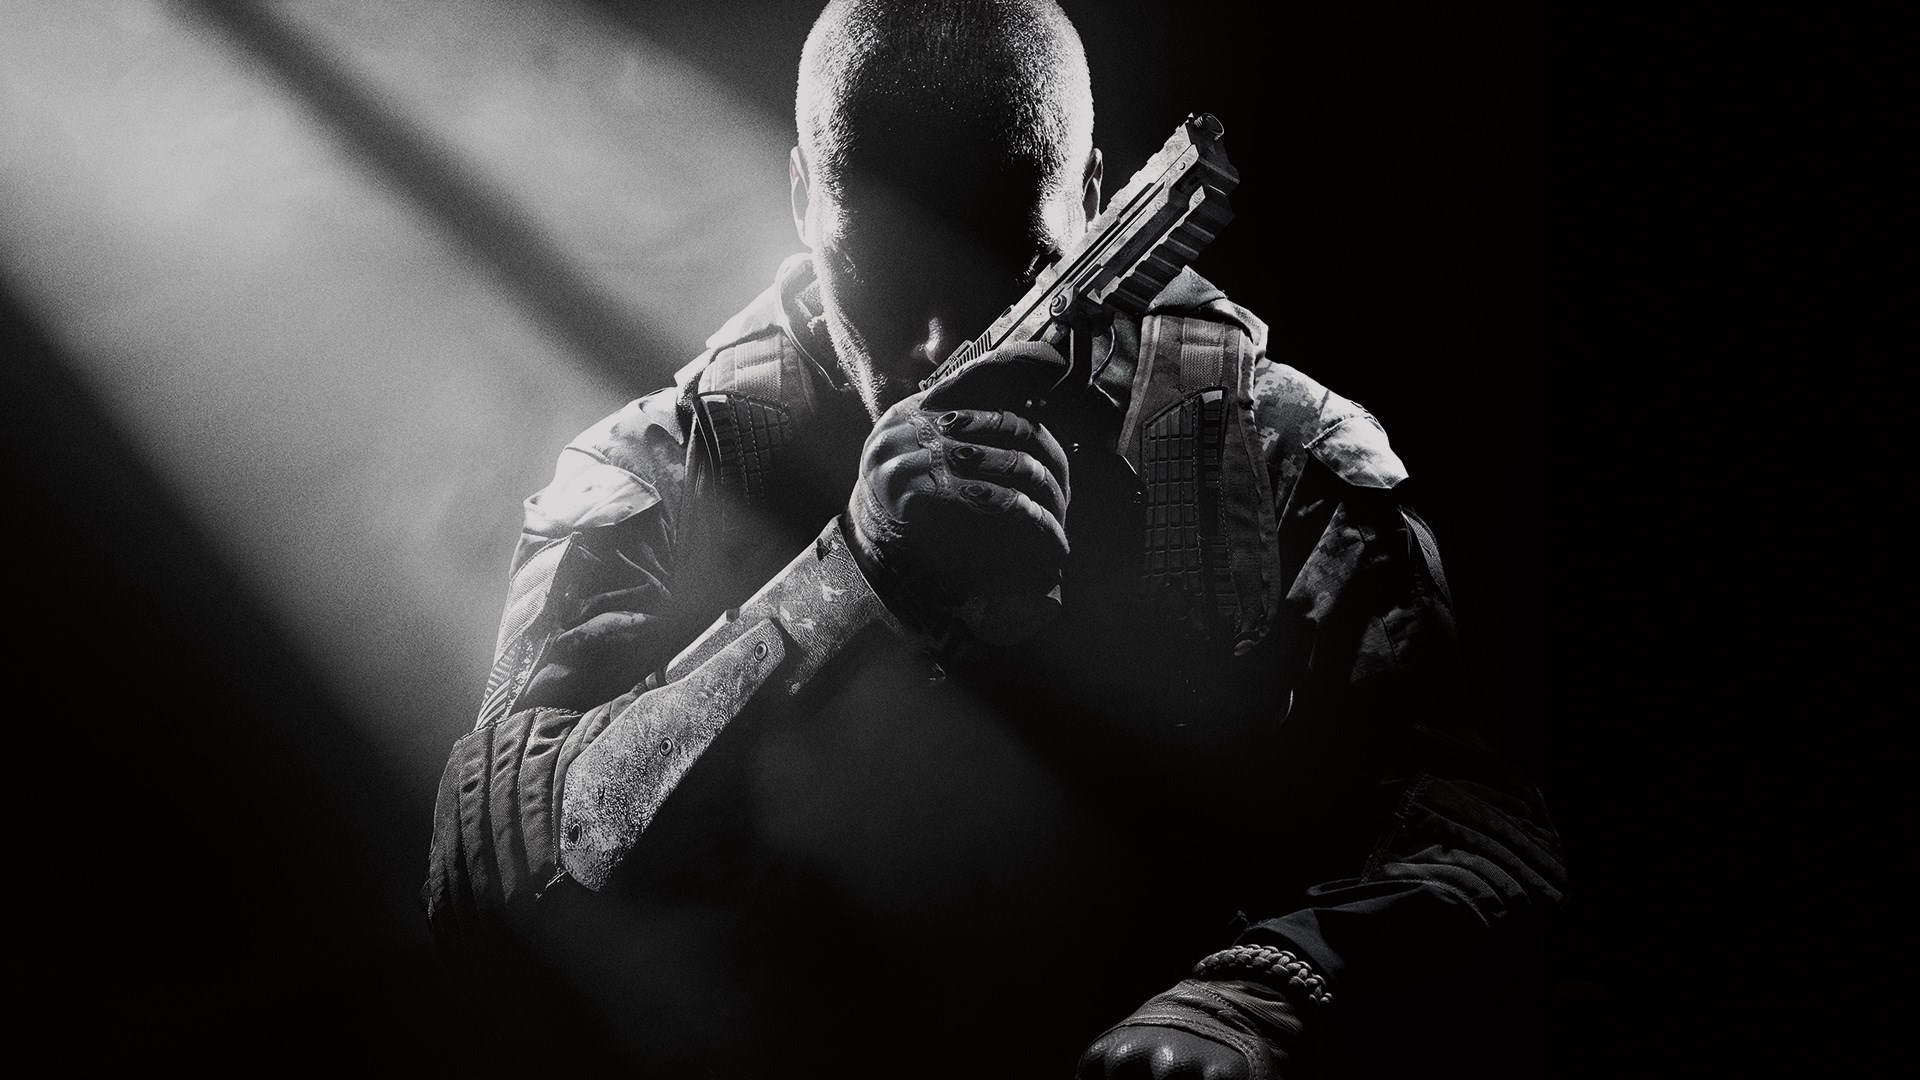 Call Of Duty Black Ops 2020 Wallpapers